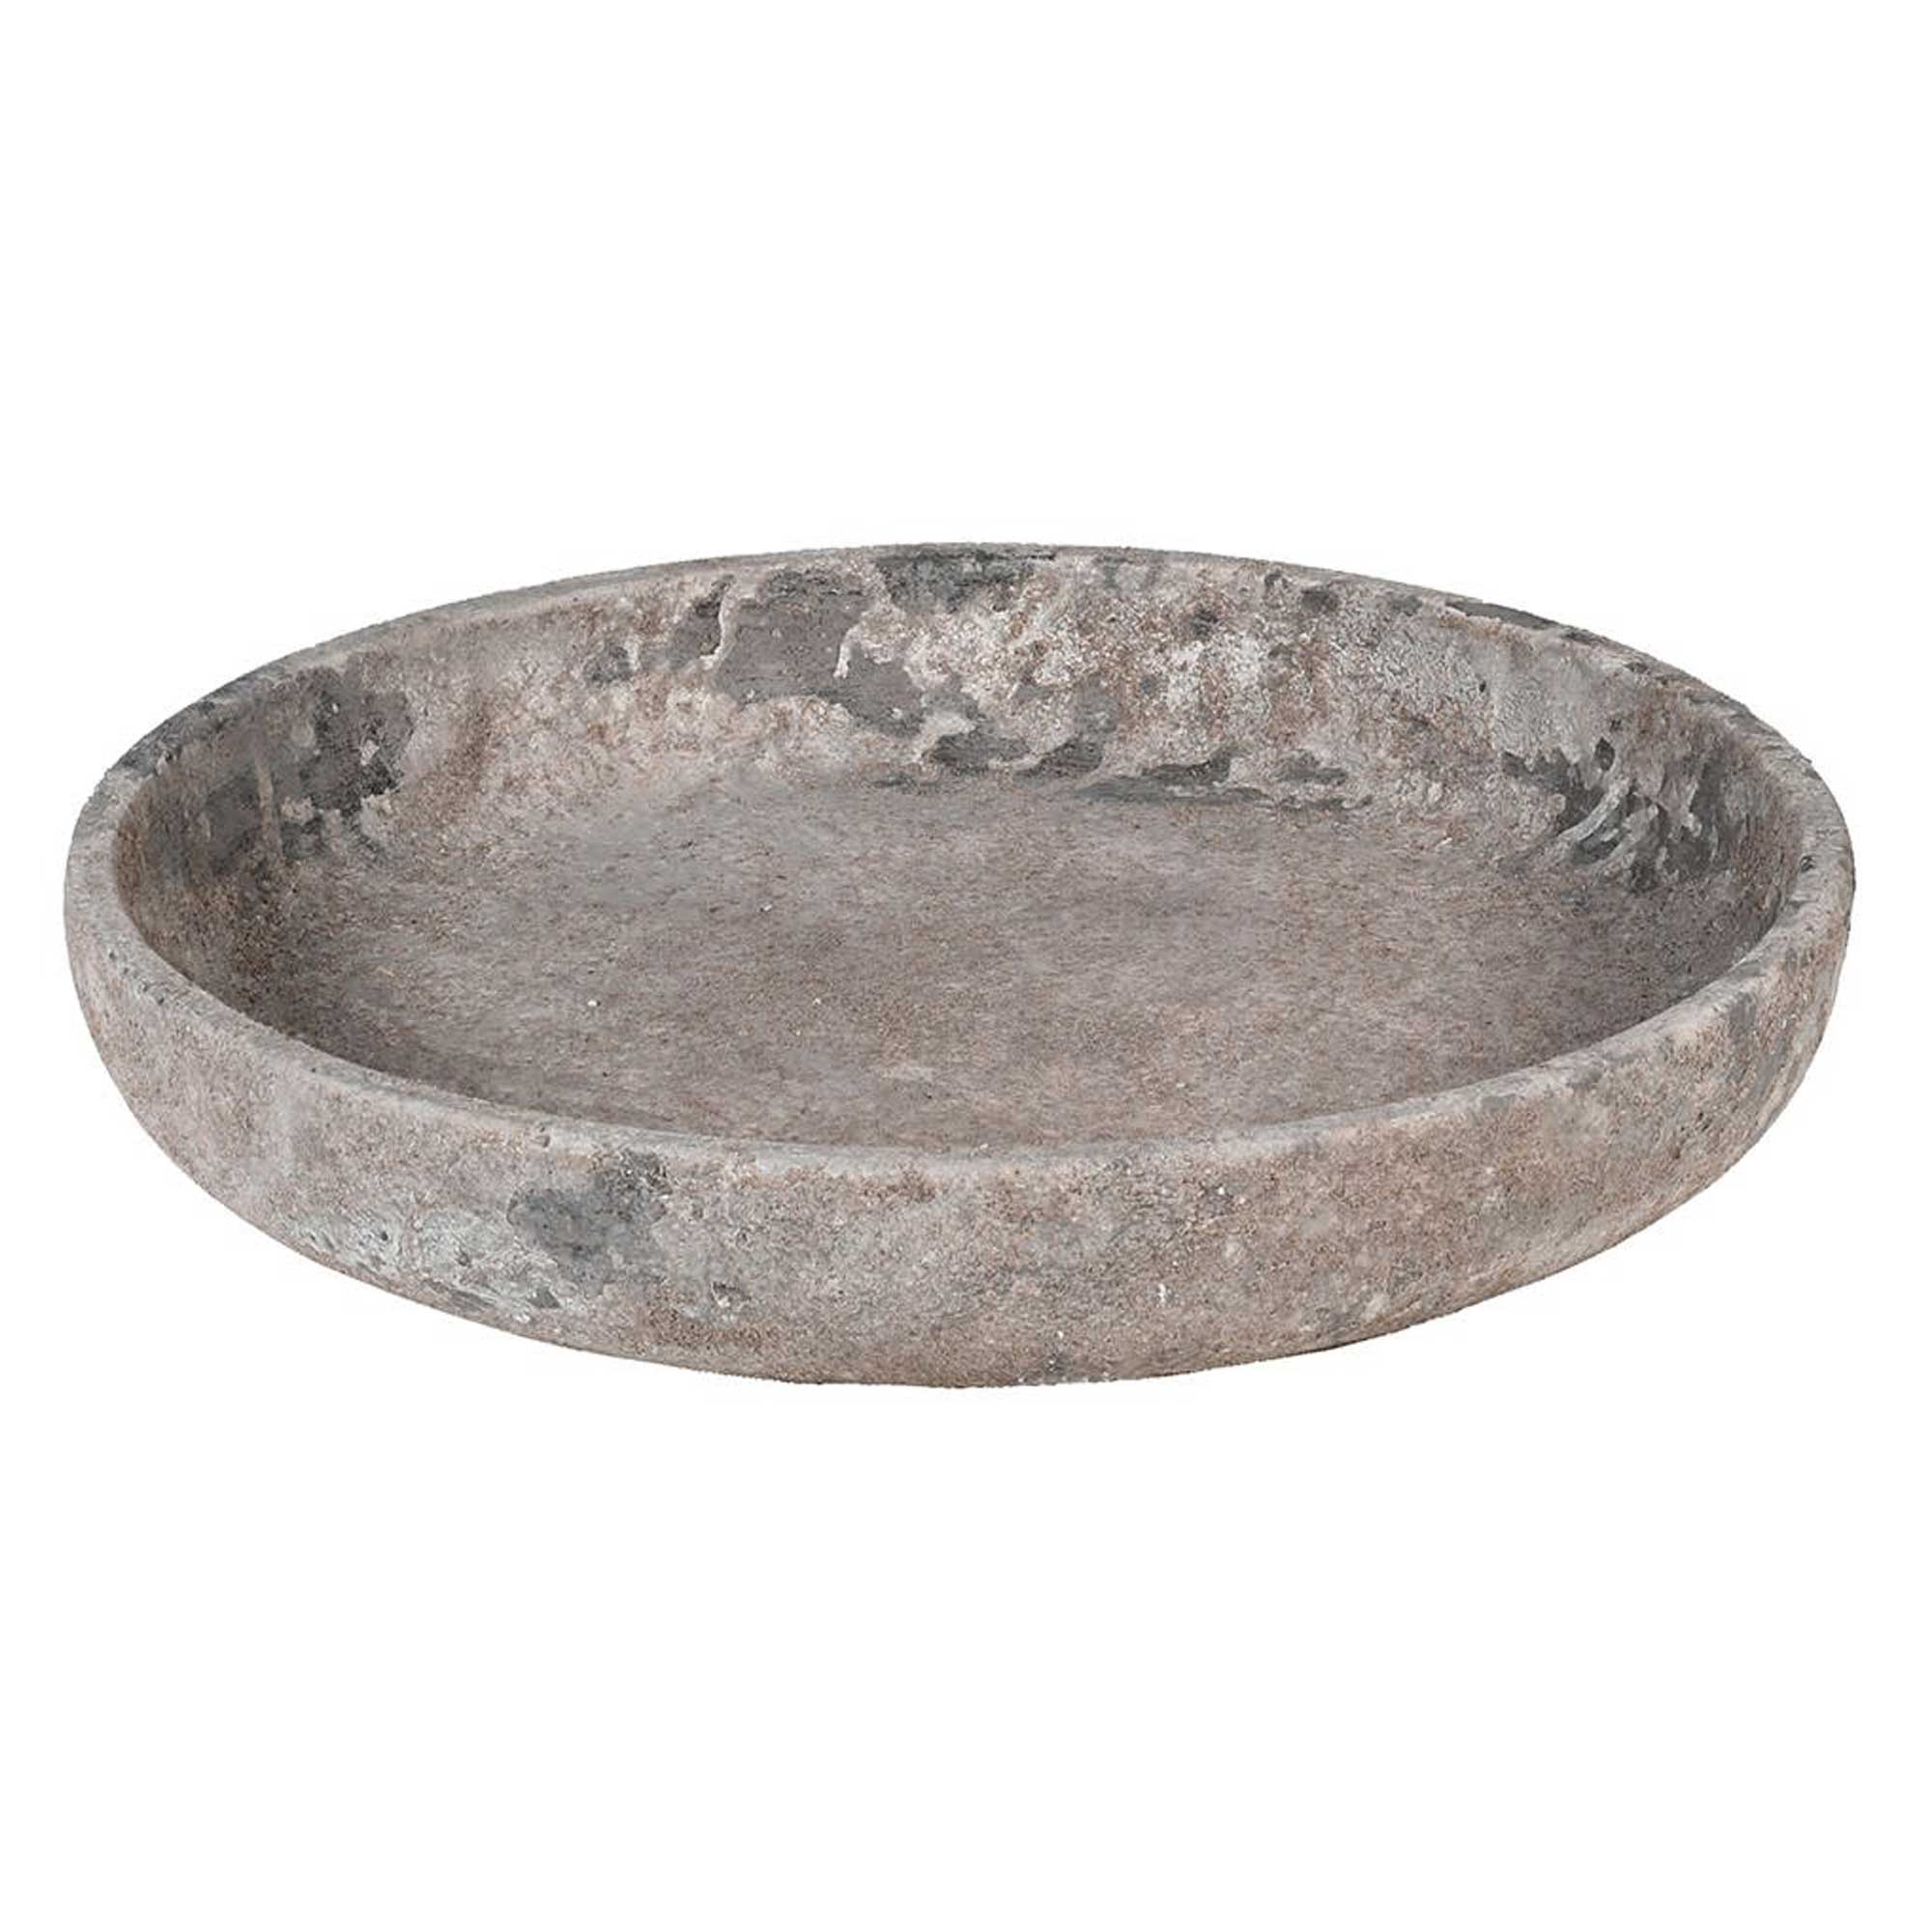 Stone Effect Distressed Bowl, Neutral | Barker & Stonehouse